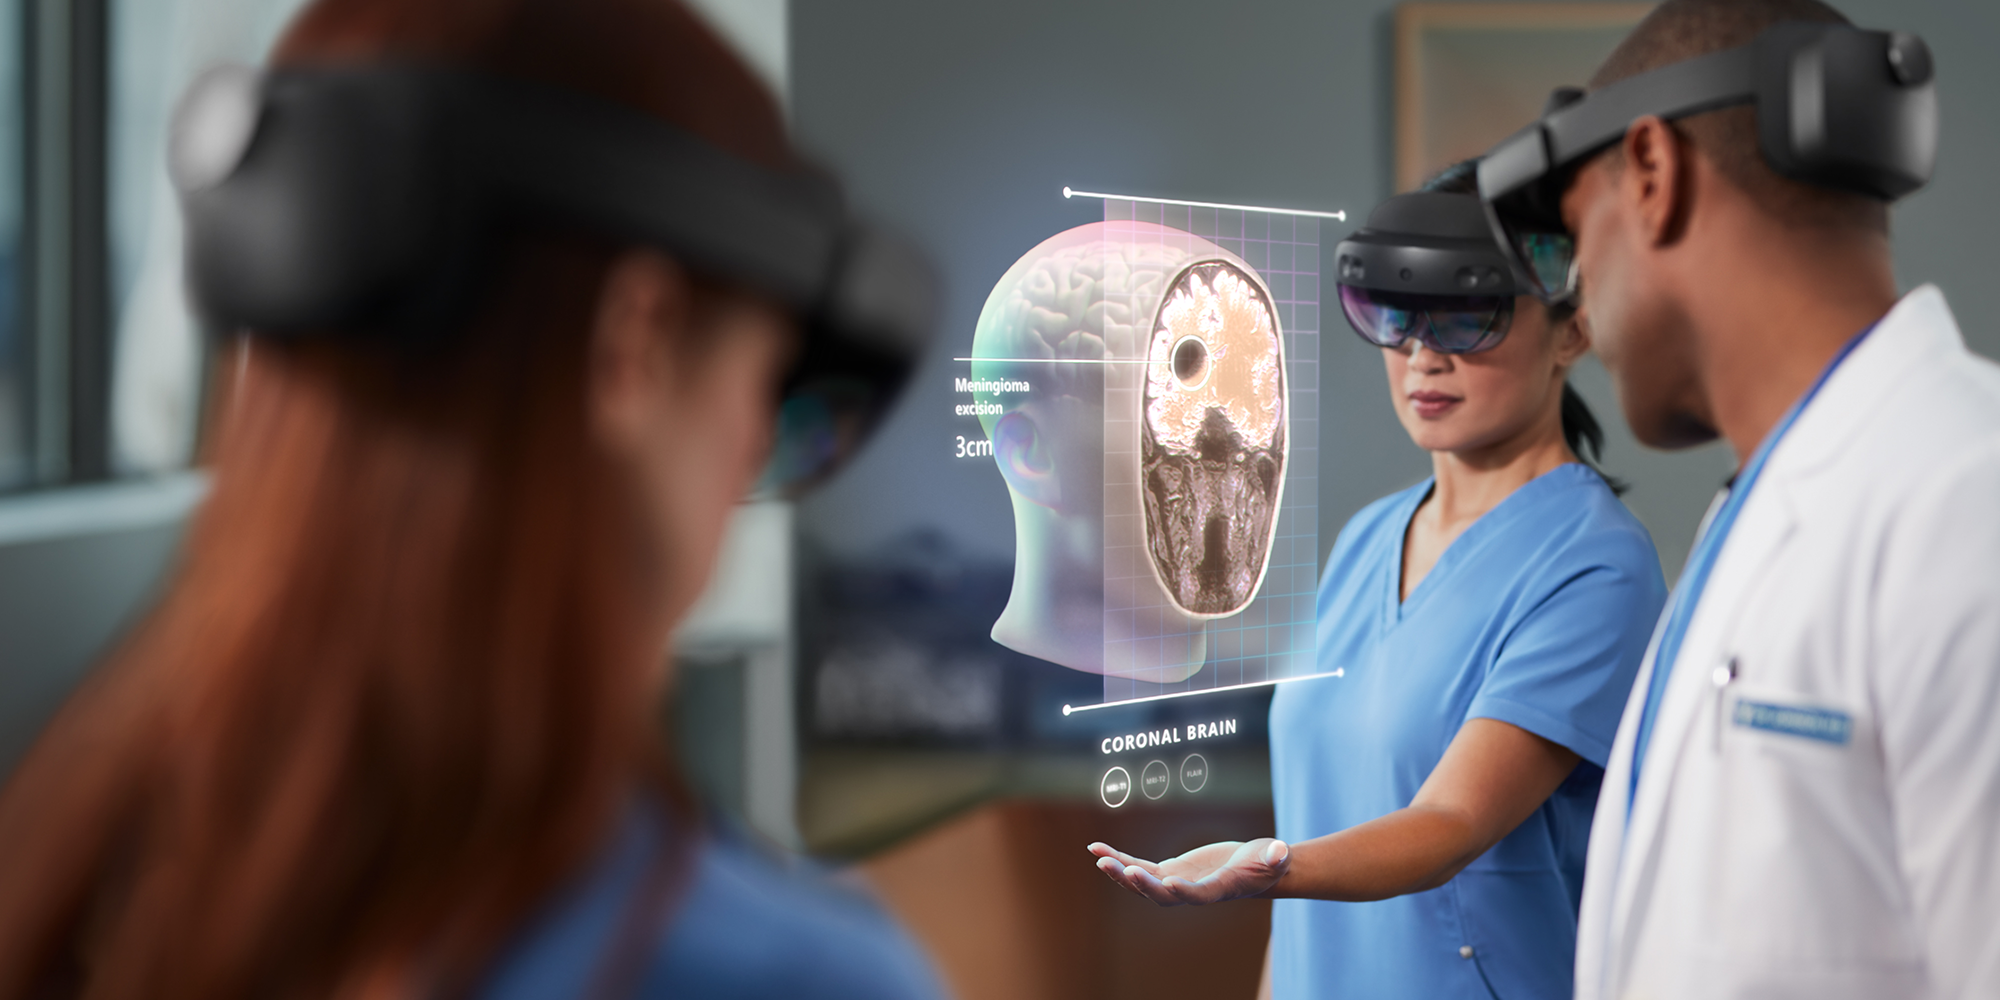 Healthcare professionals using HoloLens